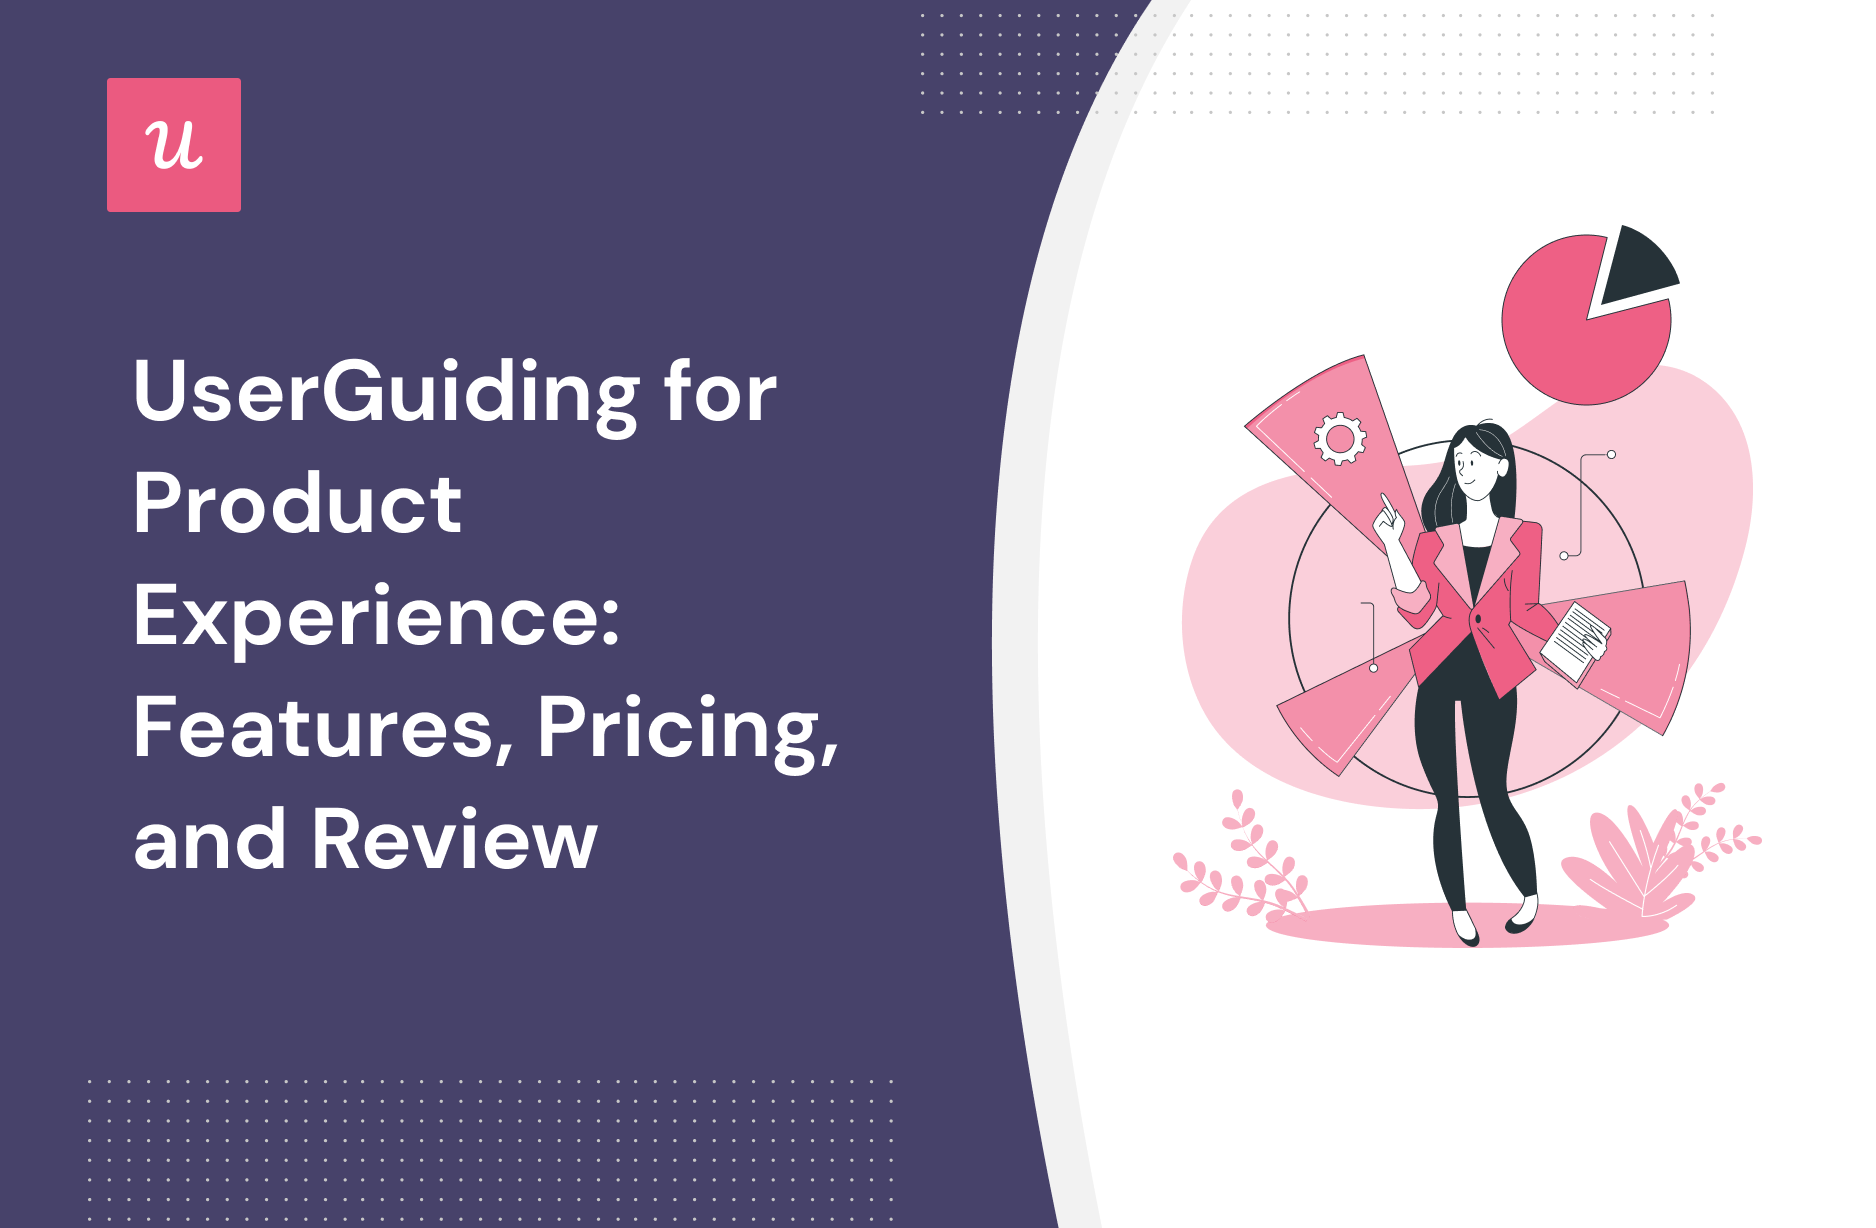 UserGuiding for Product Experience: Features, Pricing, and Review